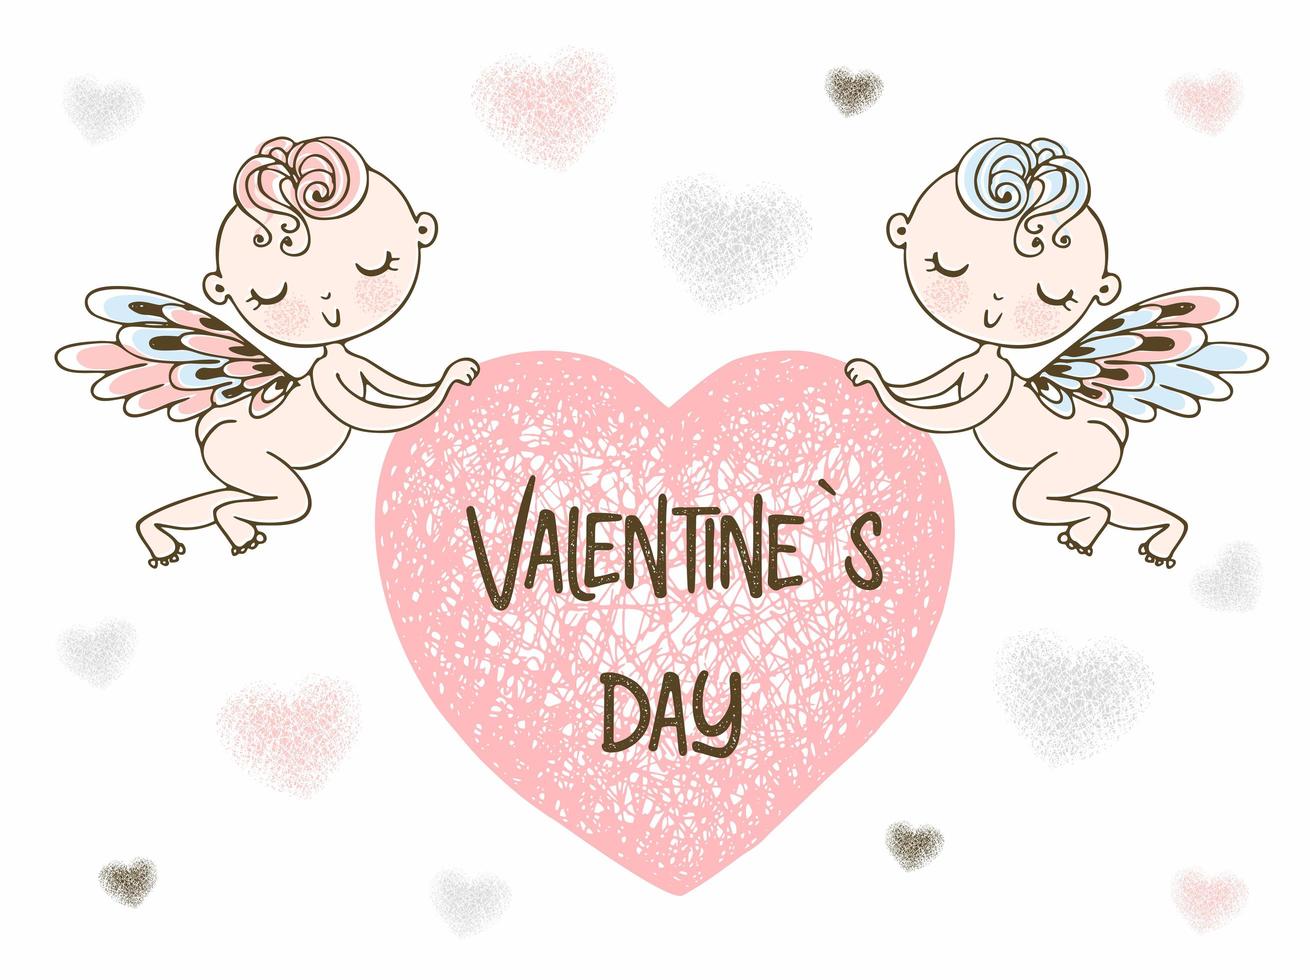 Cupids carry a big heart. Happy Valentine's day vector